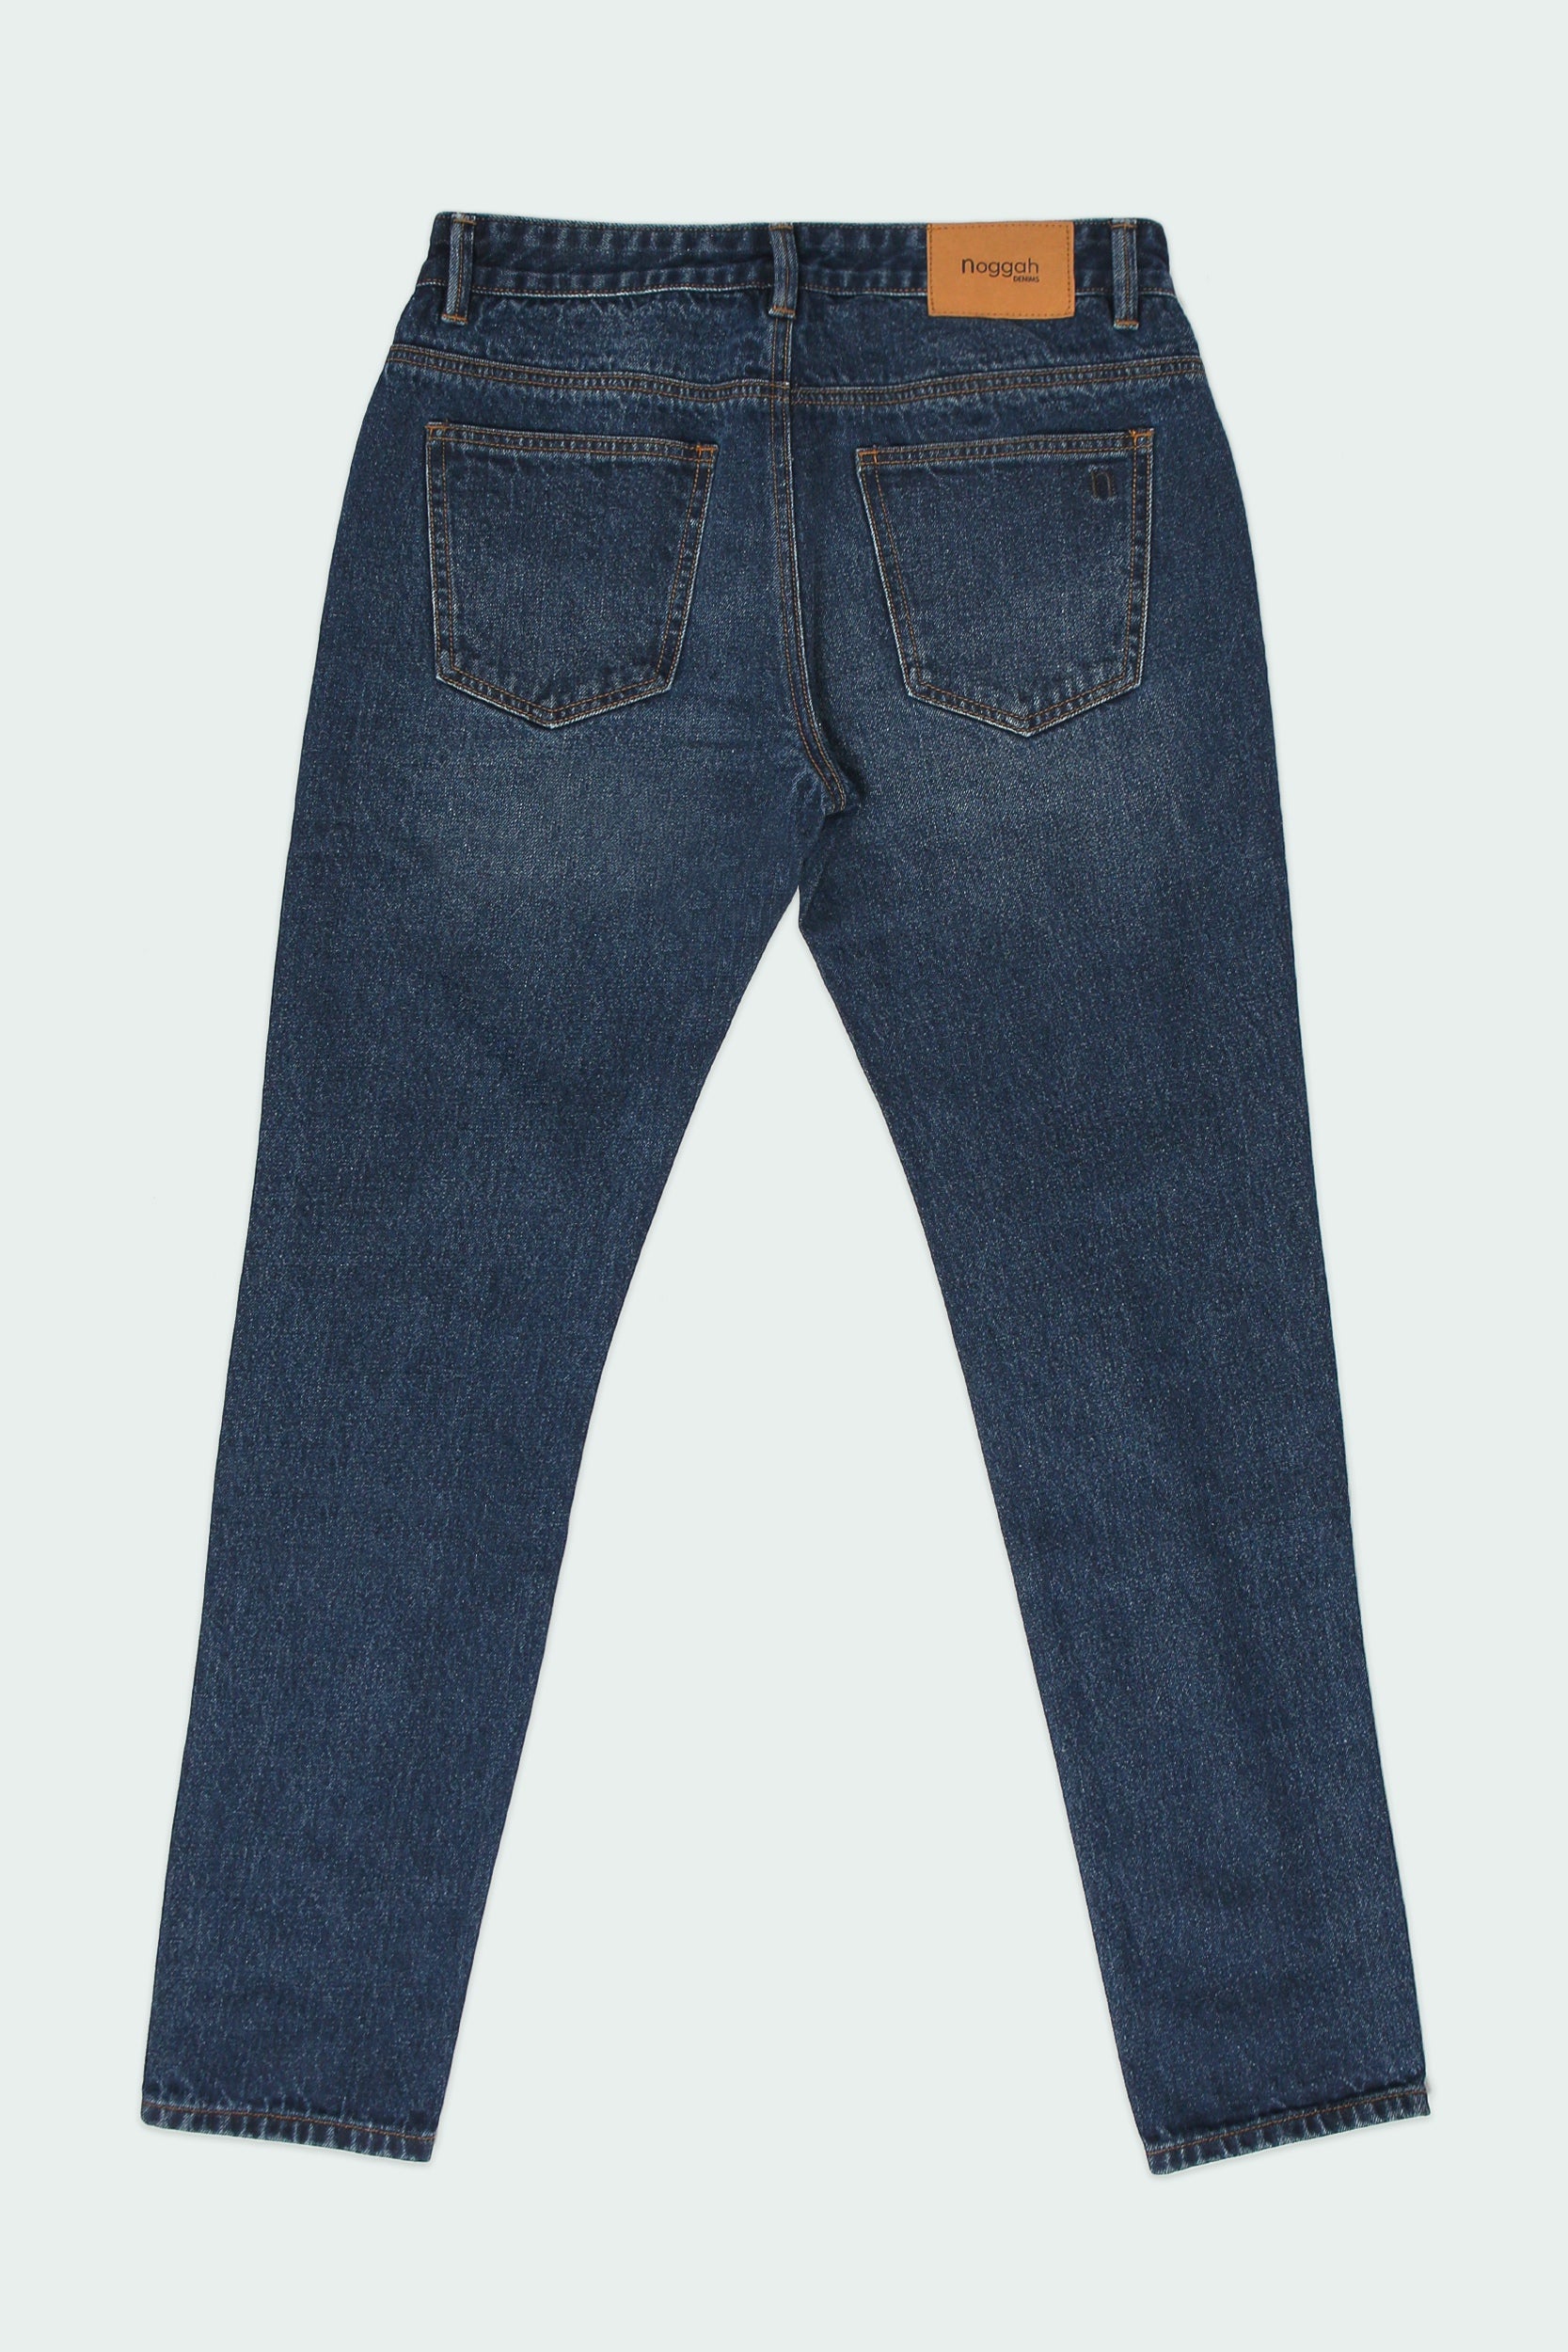 JACK & JONES Jeans sale - discounted price | FASHIOLA.in